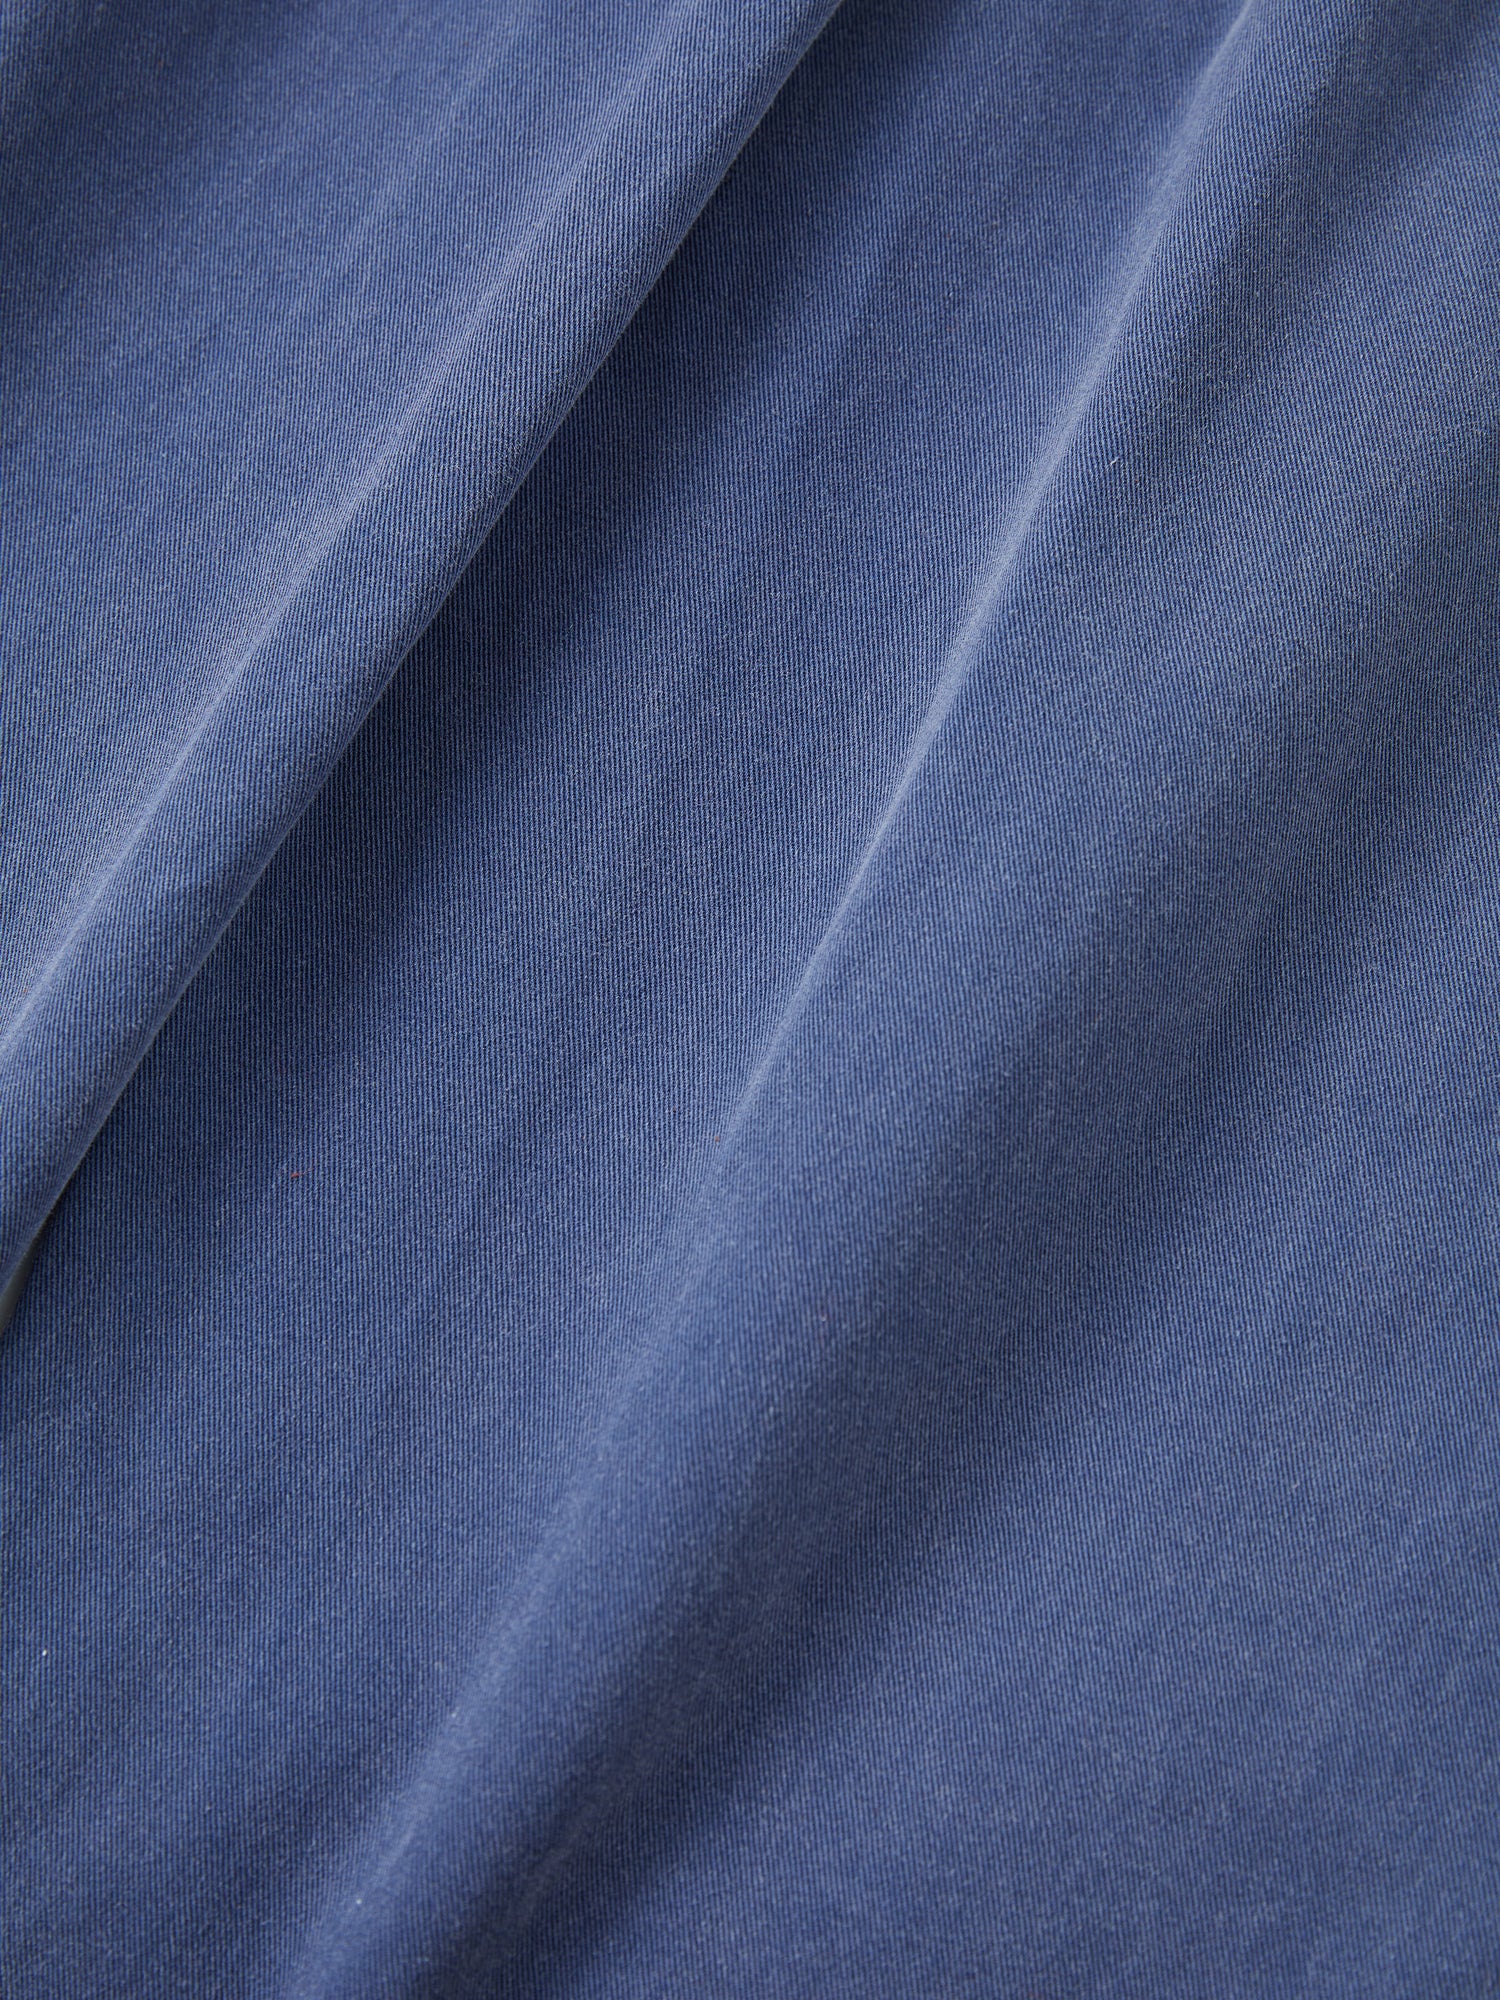 A close up image of Found River Painters Chore Pants in a blue fabric.